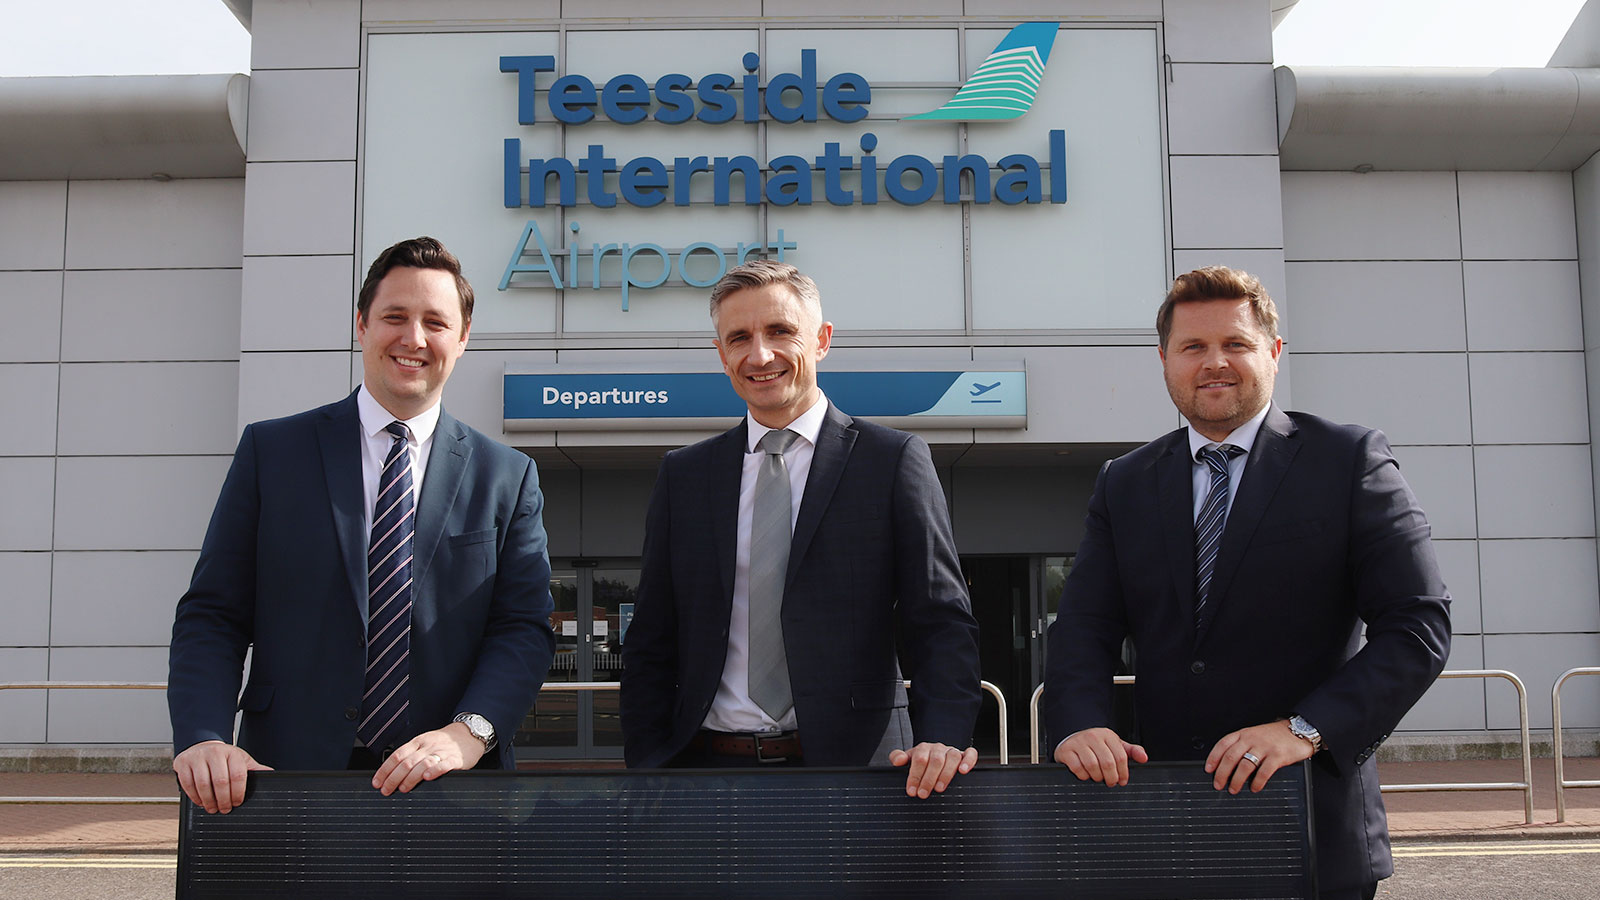 SSE and Teesside International Airport have announced plans for a brand-new solar farm that could provide up to 50 MW of generation capacity